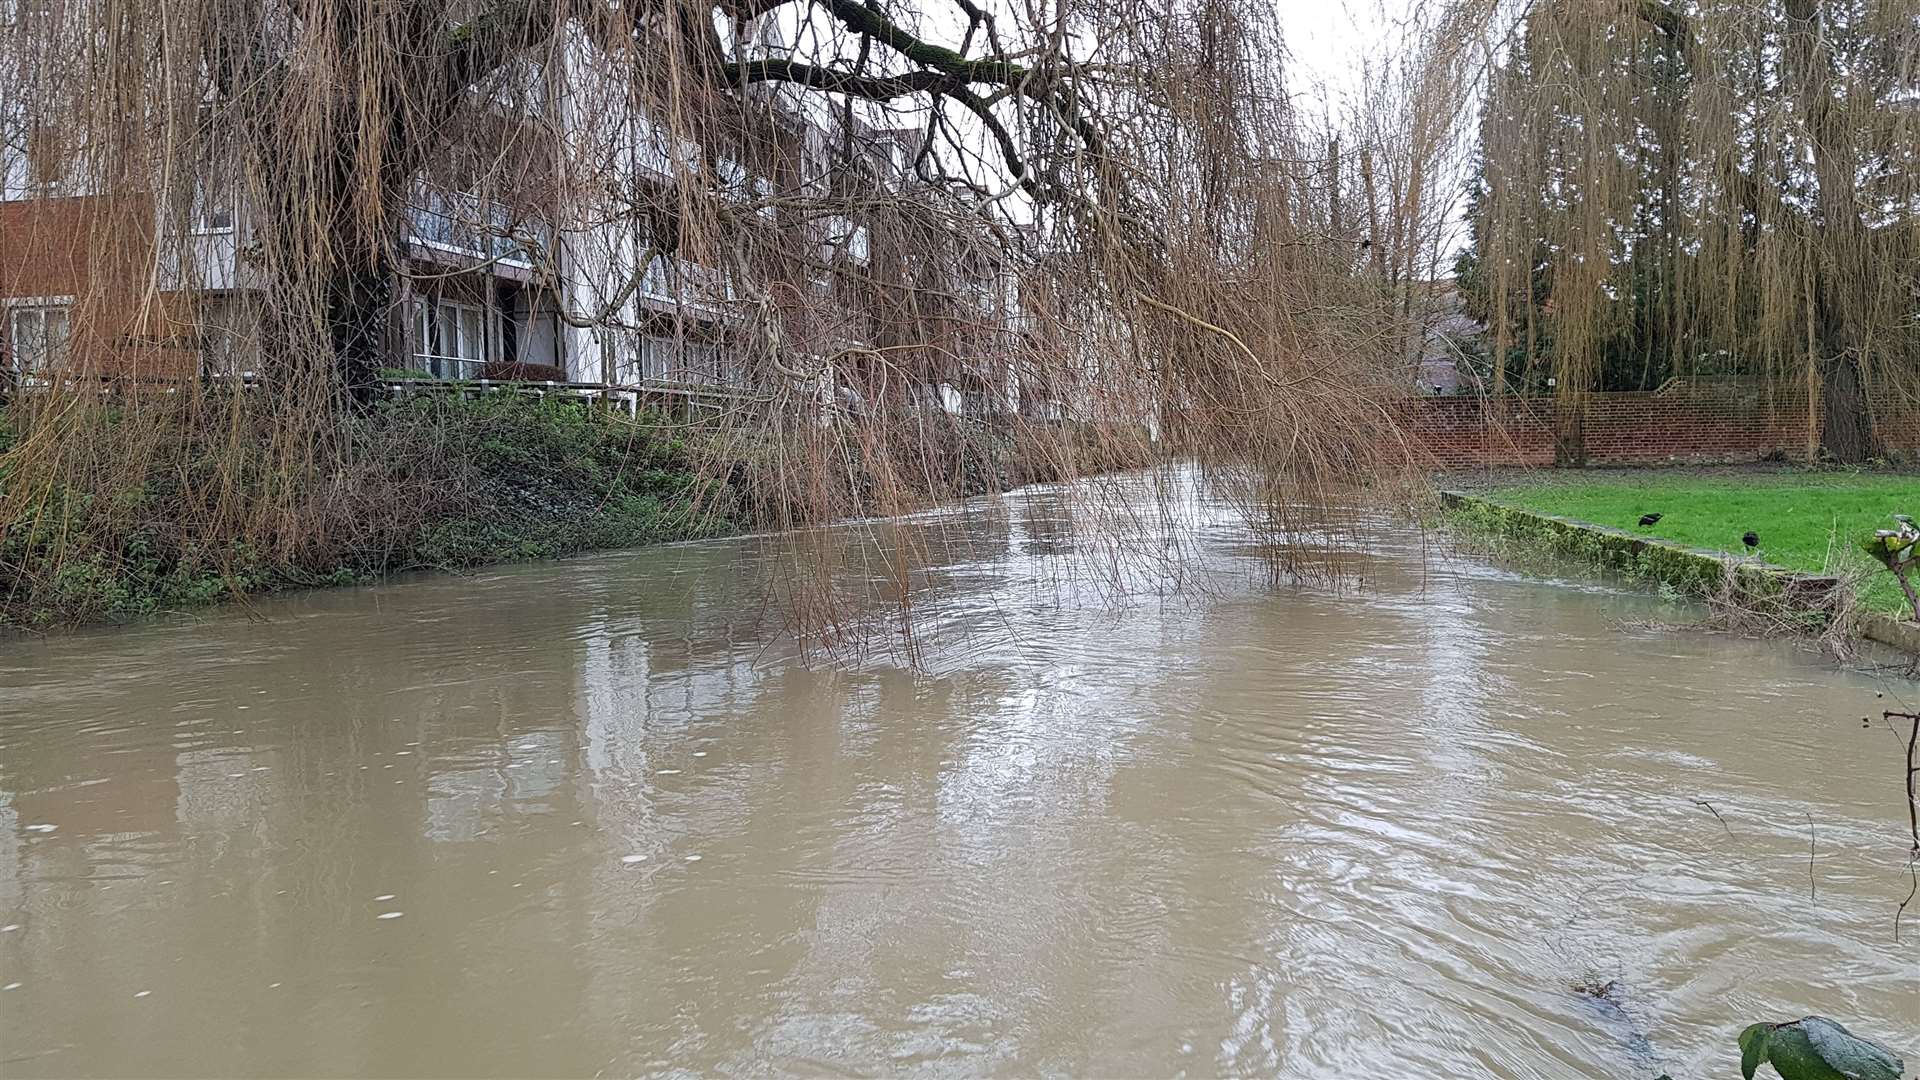 The duck was spotted on the River Stour in Canterbury, where water levels are currently high after a prolonged period of rain